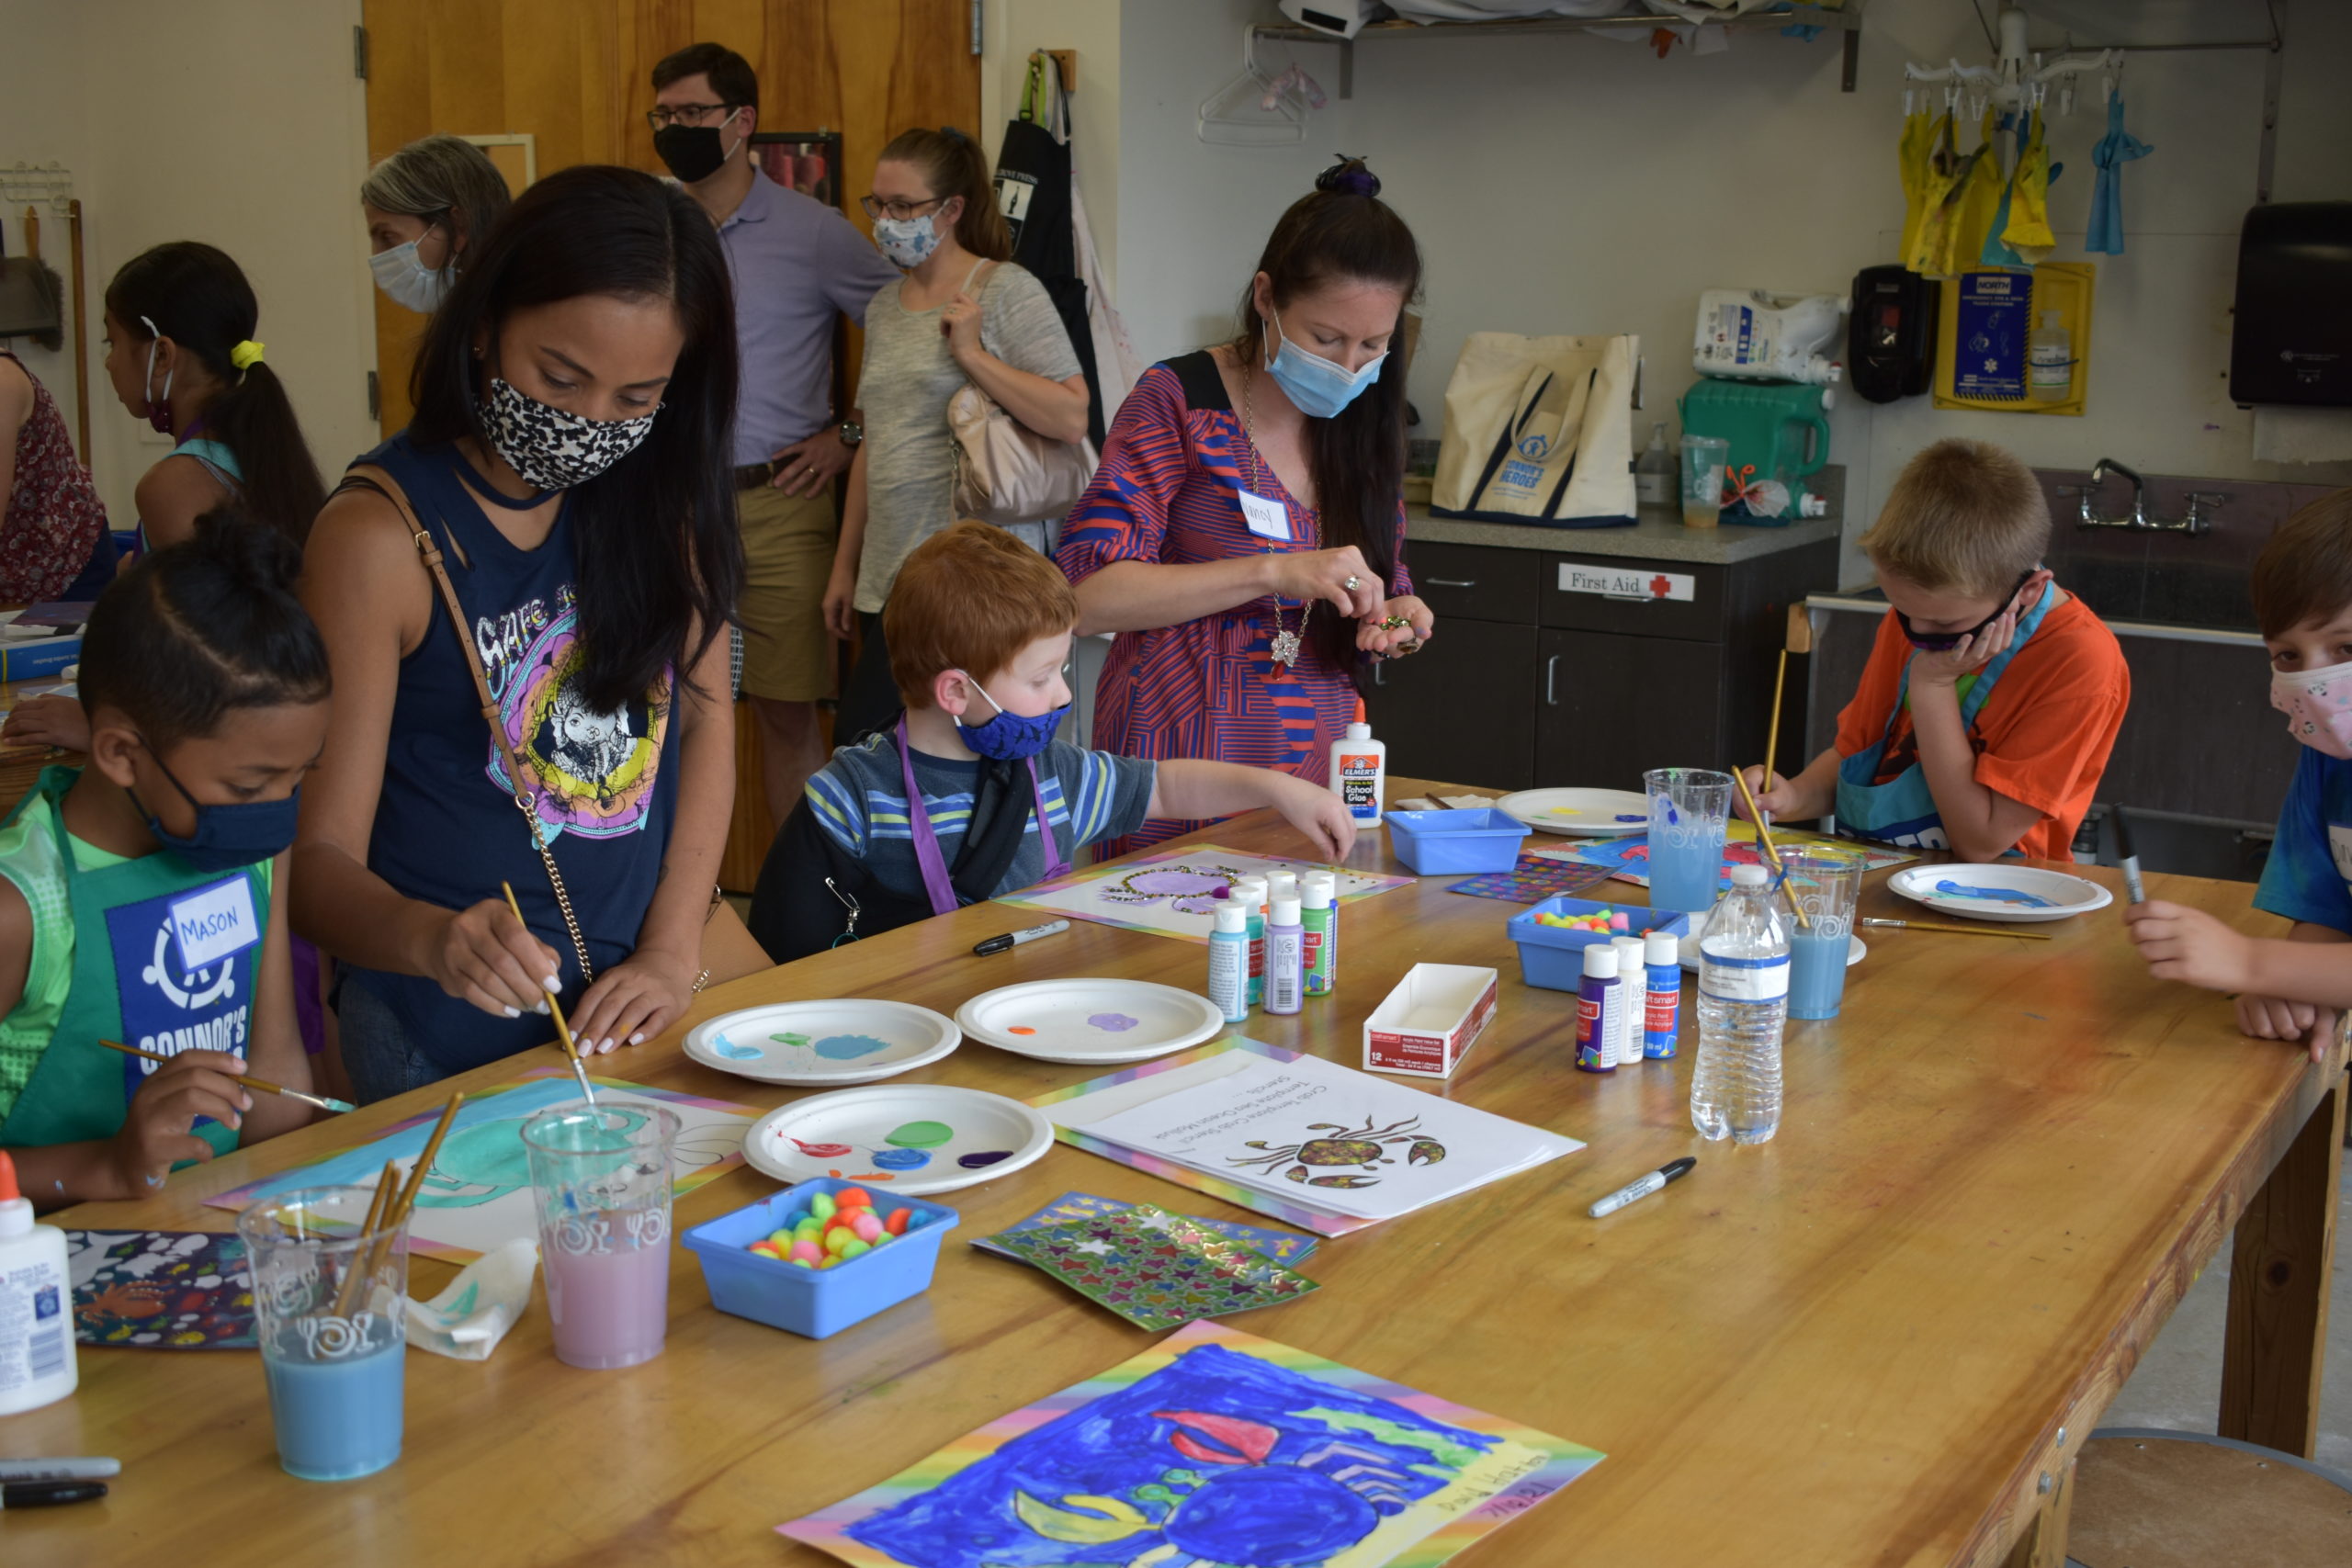 Two adults and four child at a table painting in an art studio